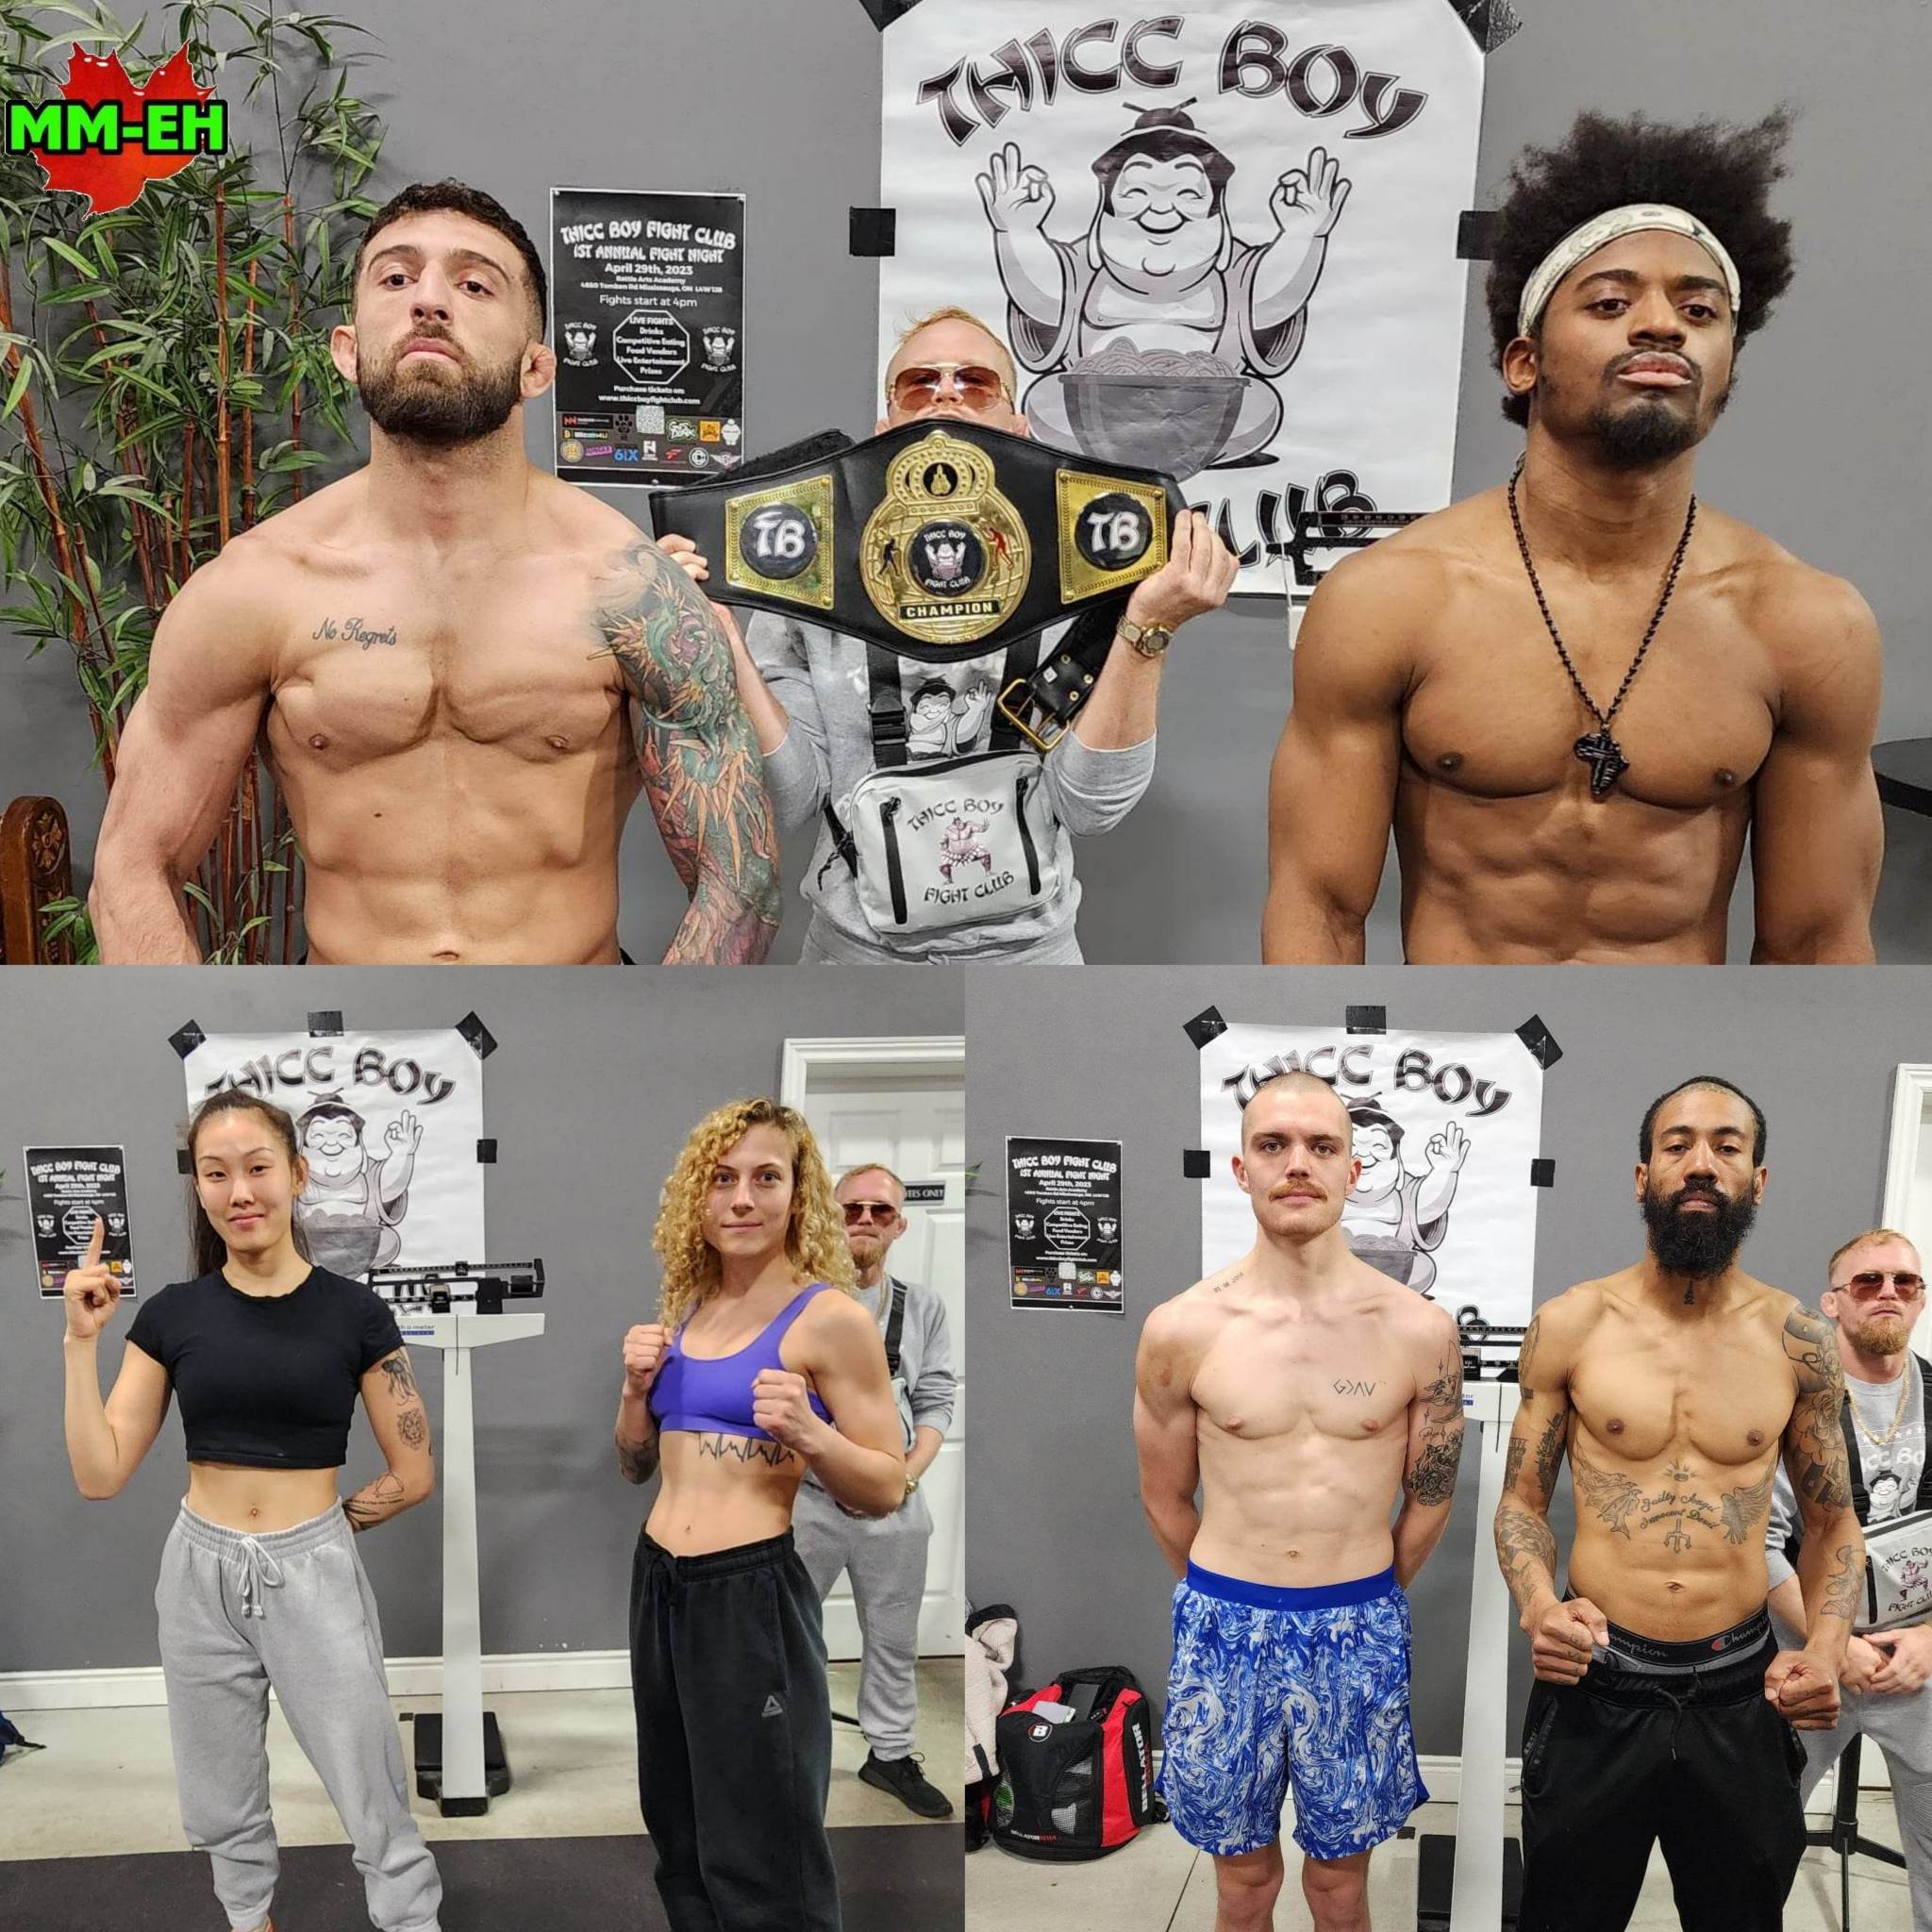 Thicc Boy Fight Club 1 Live Results – MM-eh